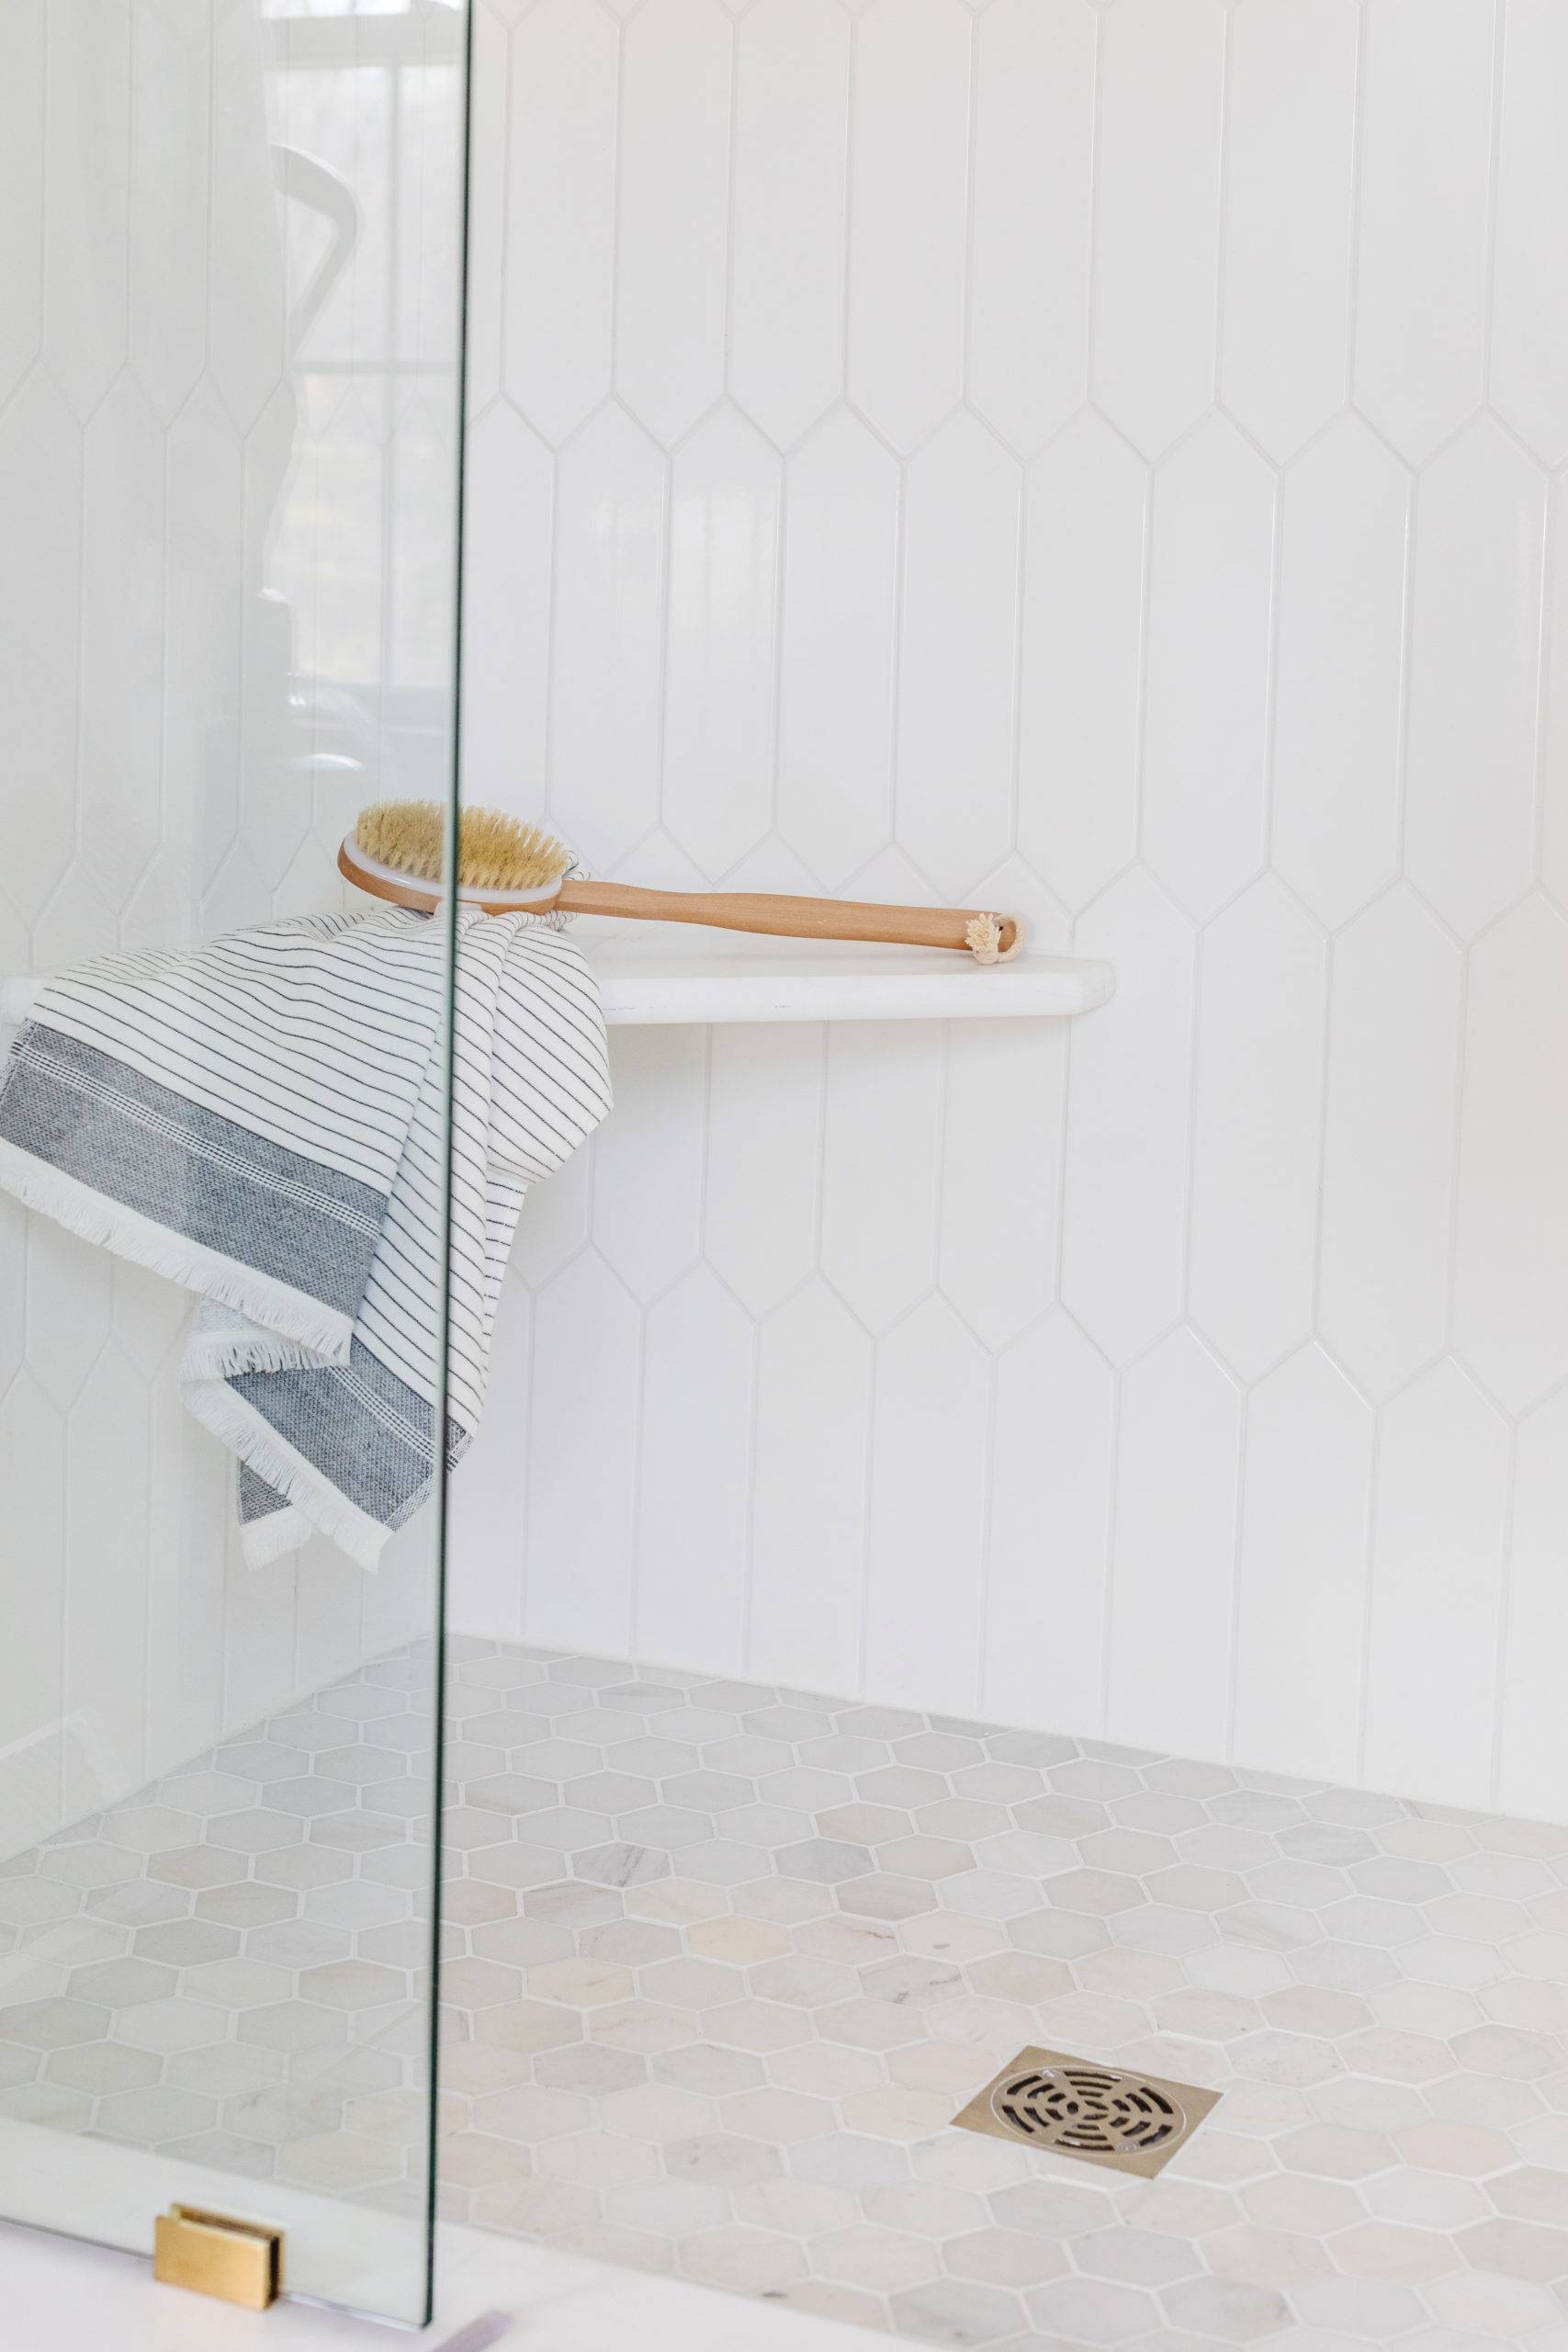 Tiled bathroom shower with white picket wall tile and marble hex mosaic flooring